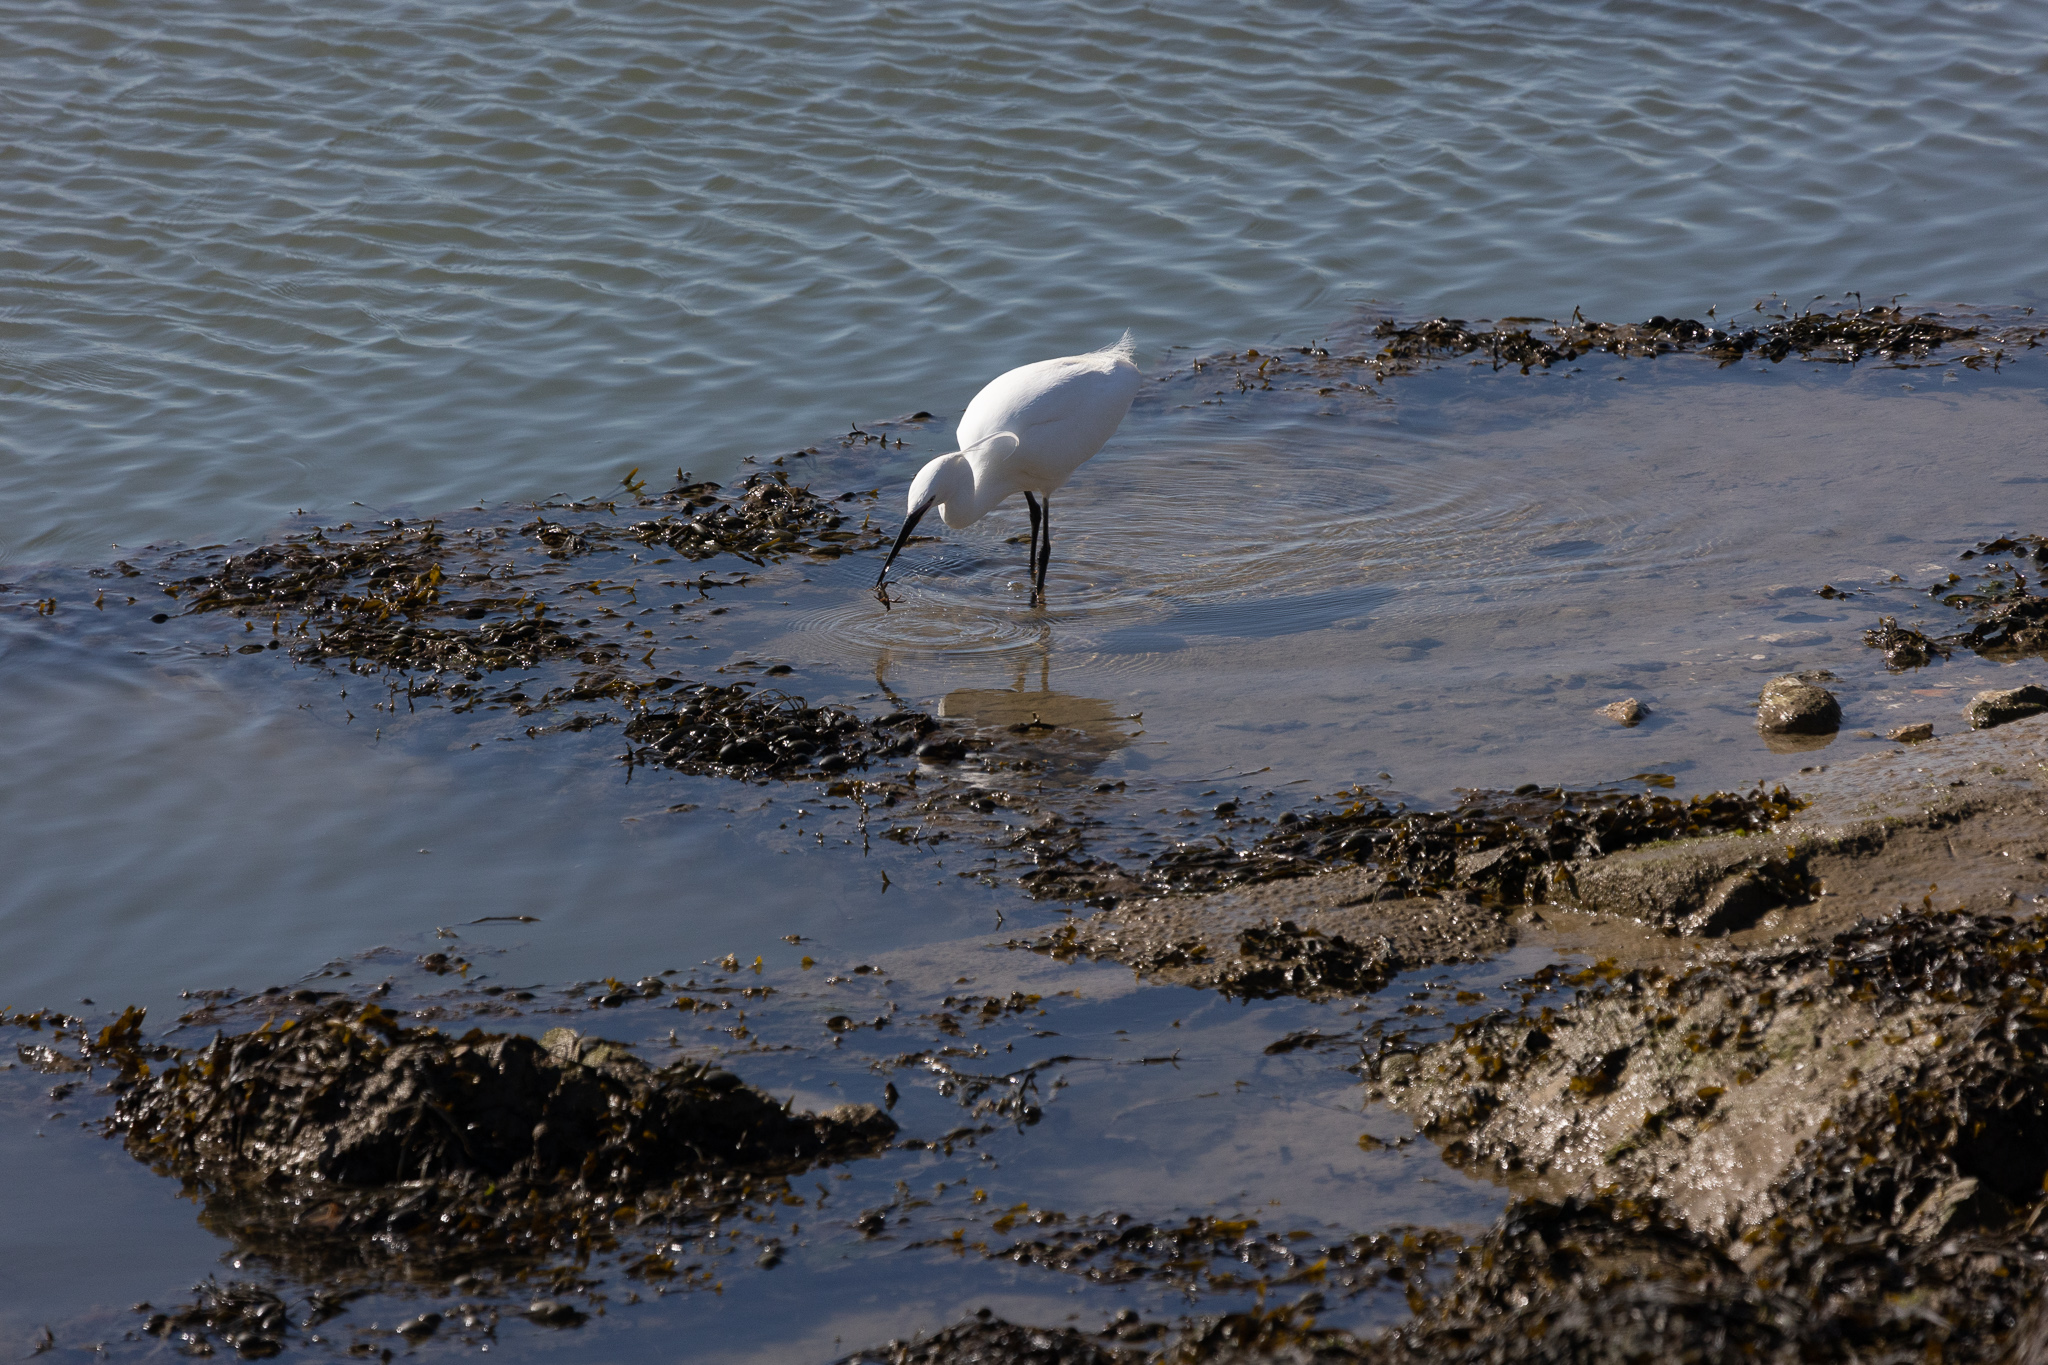 Little Egret in shallow sea water catching a crab